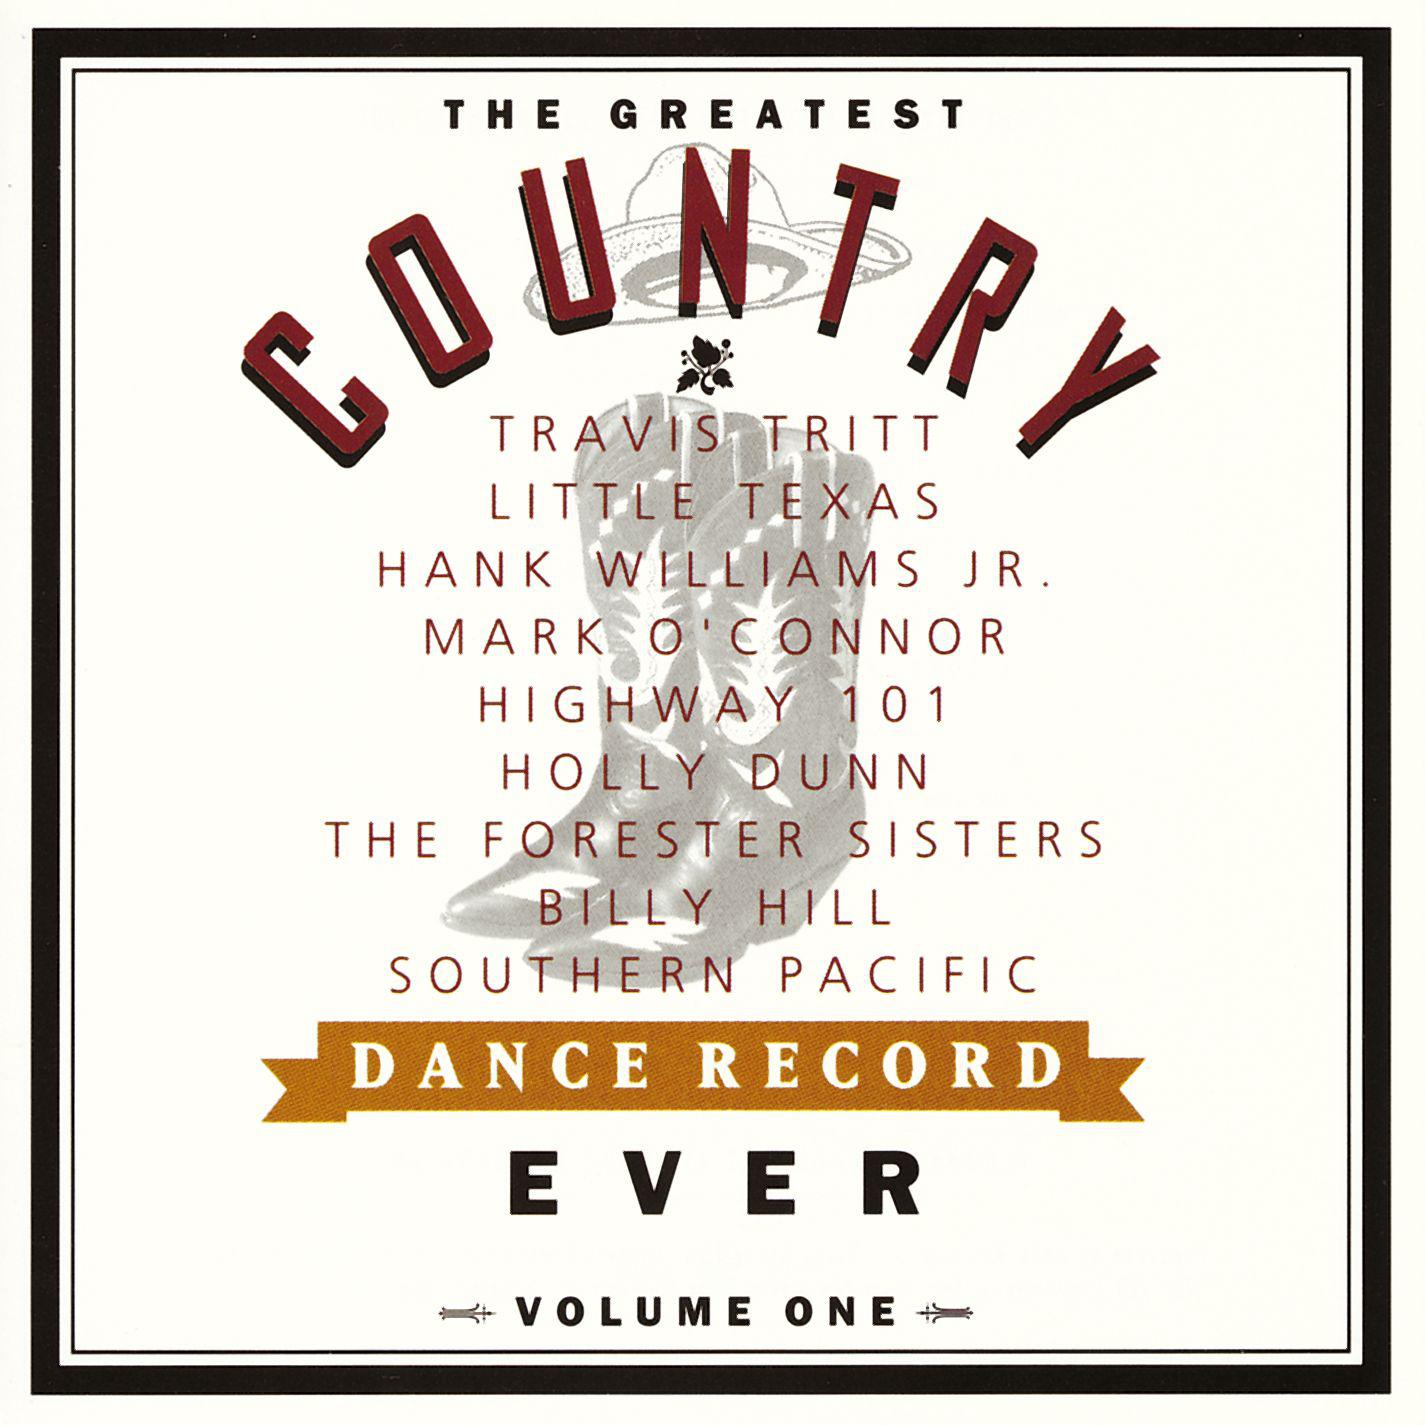 The Greatest Country Dance Record Ever Volume One